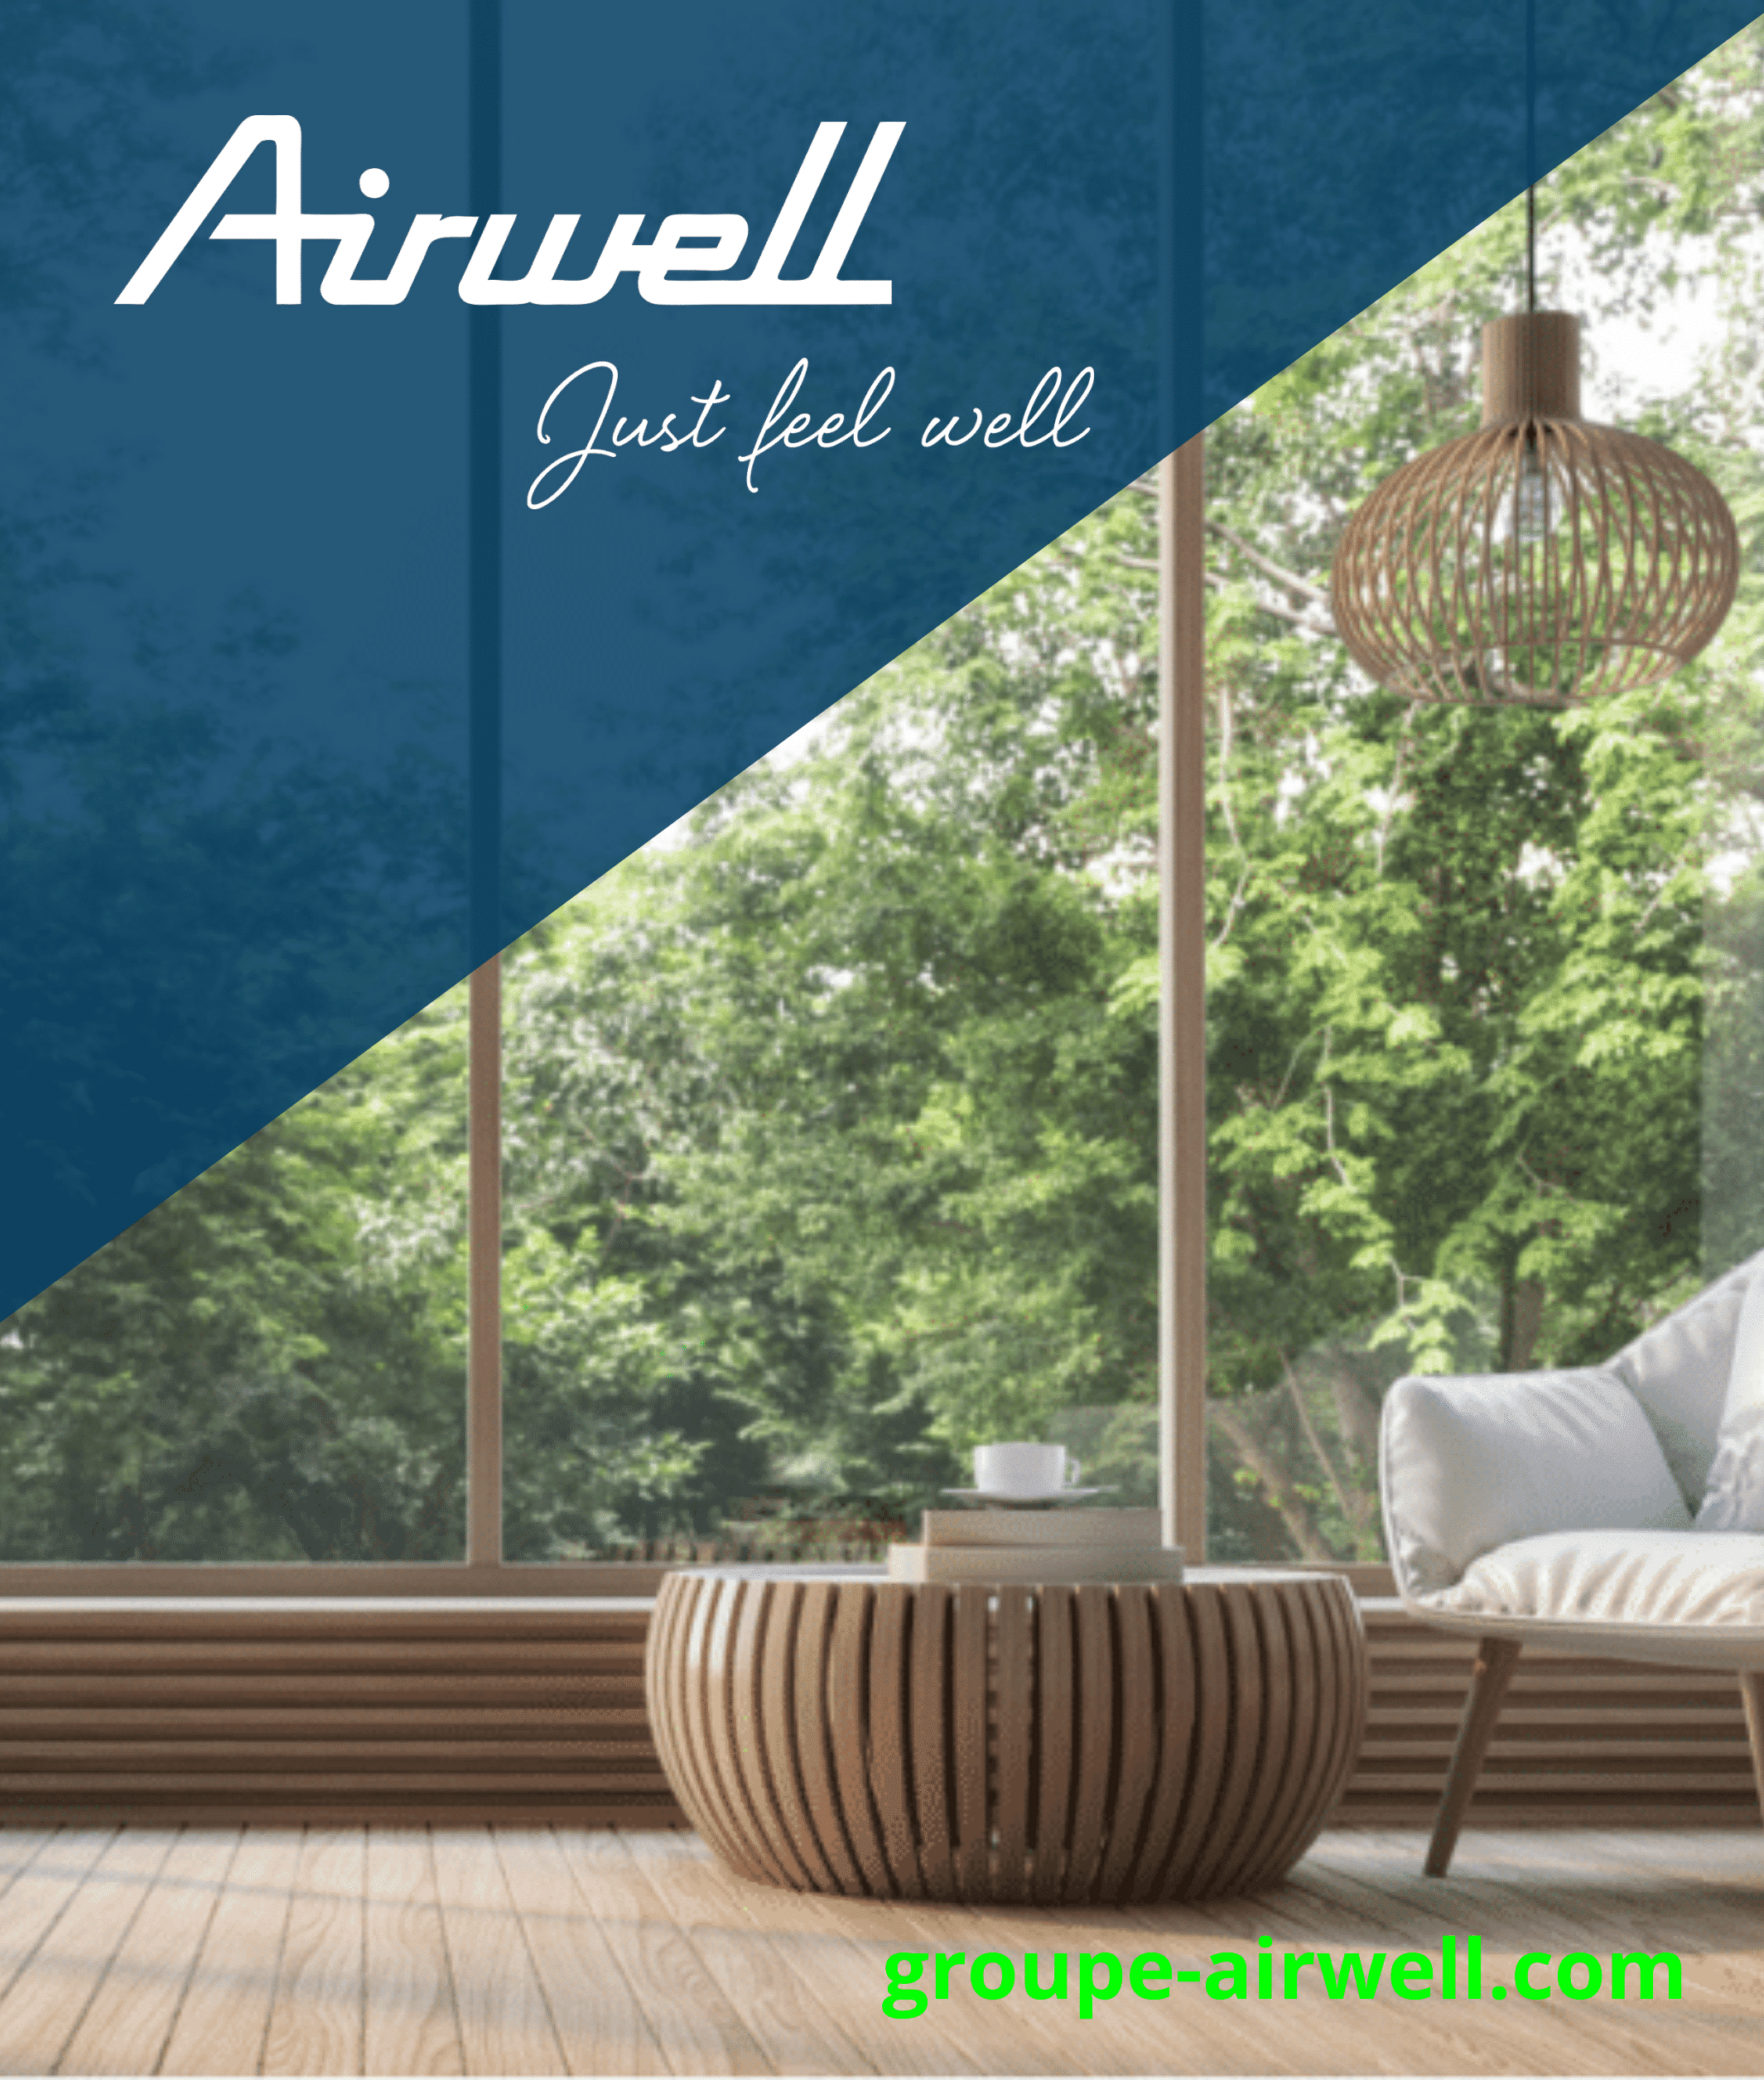 Airwell - The solution for professionals in air conditioning and heating